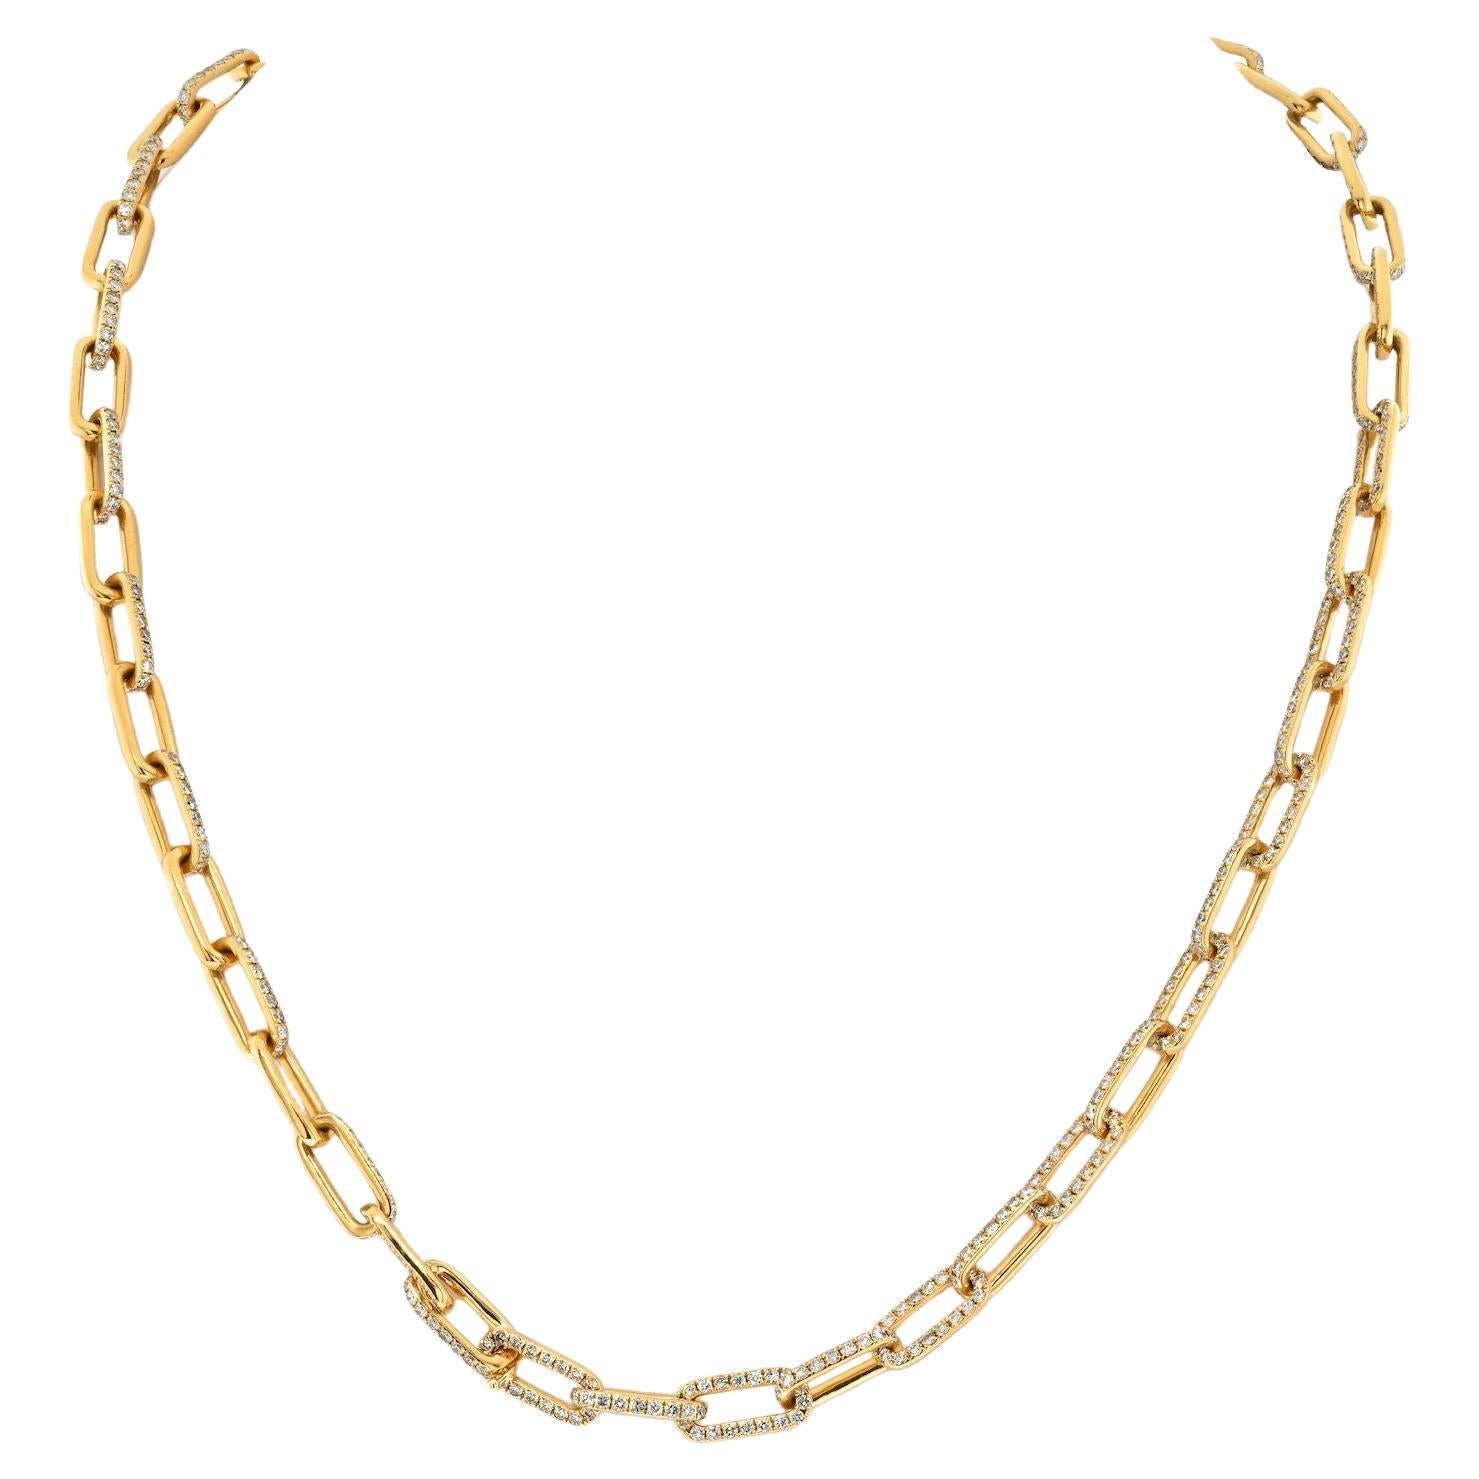 18K Yellow Gold 21 Carat Diamond Link Chain Necklace For Sale